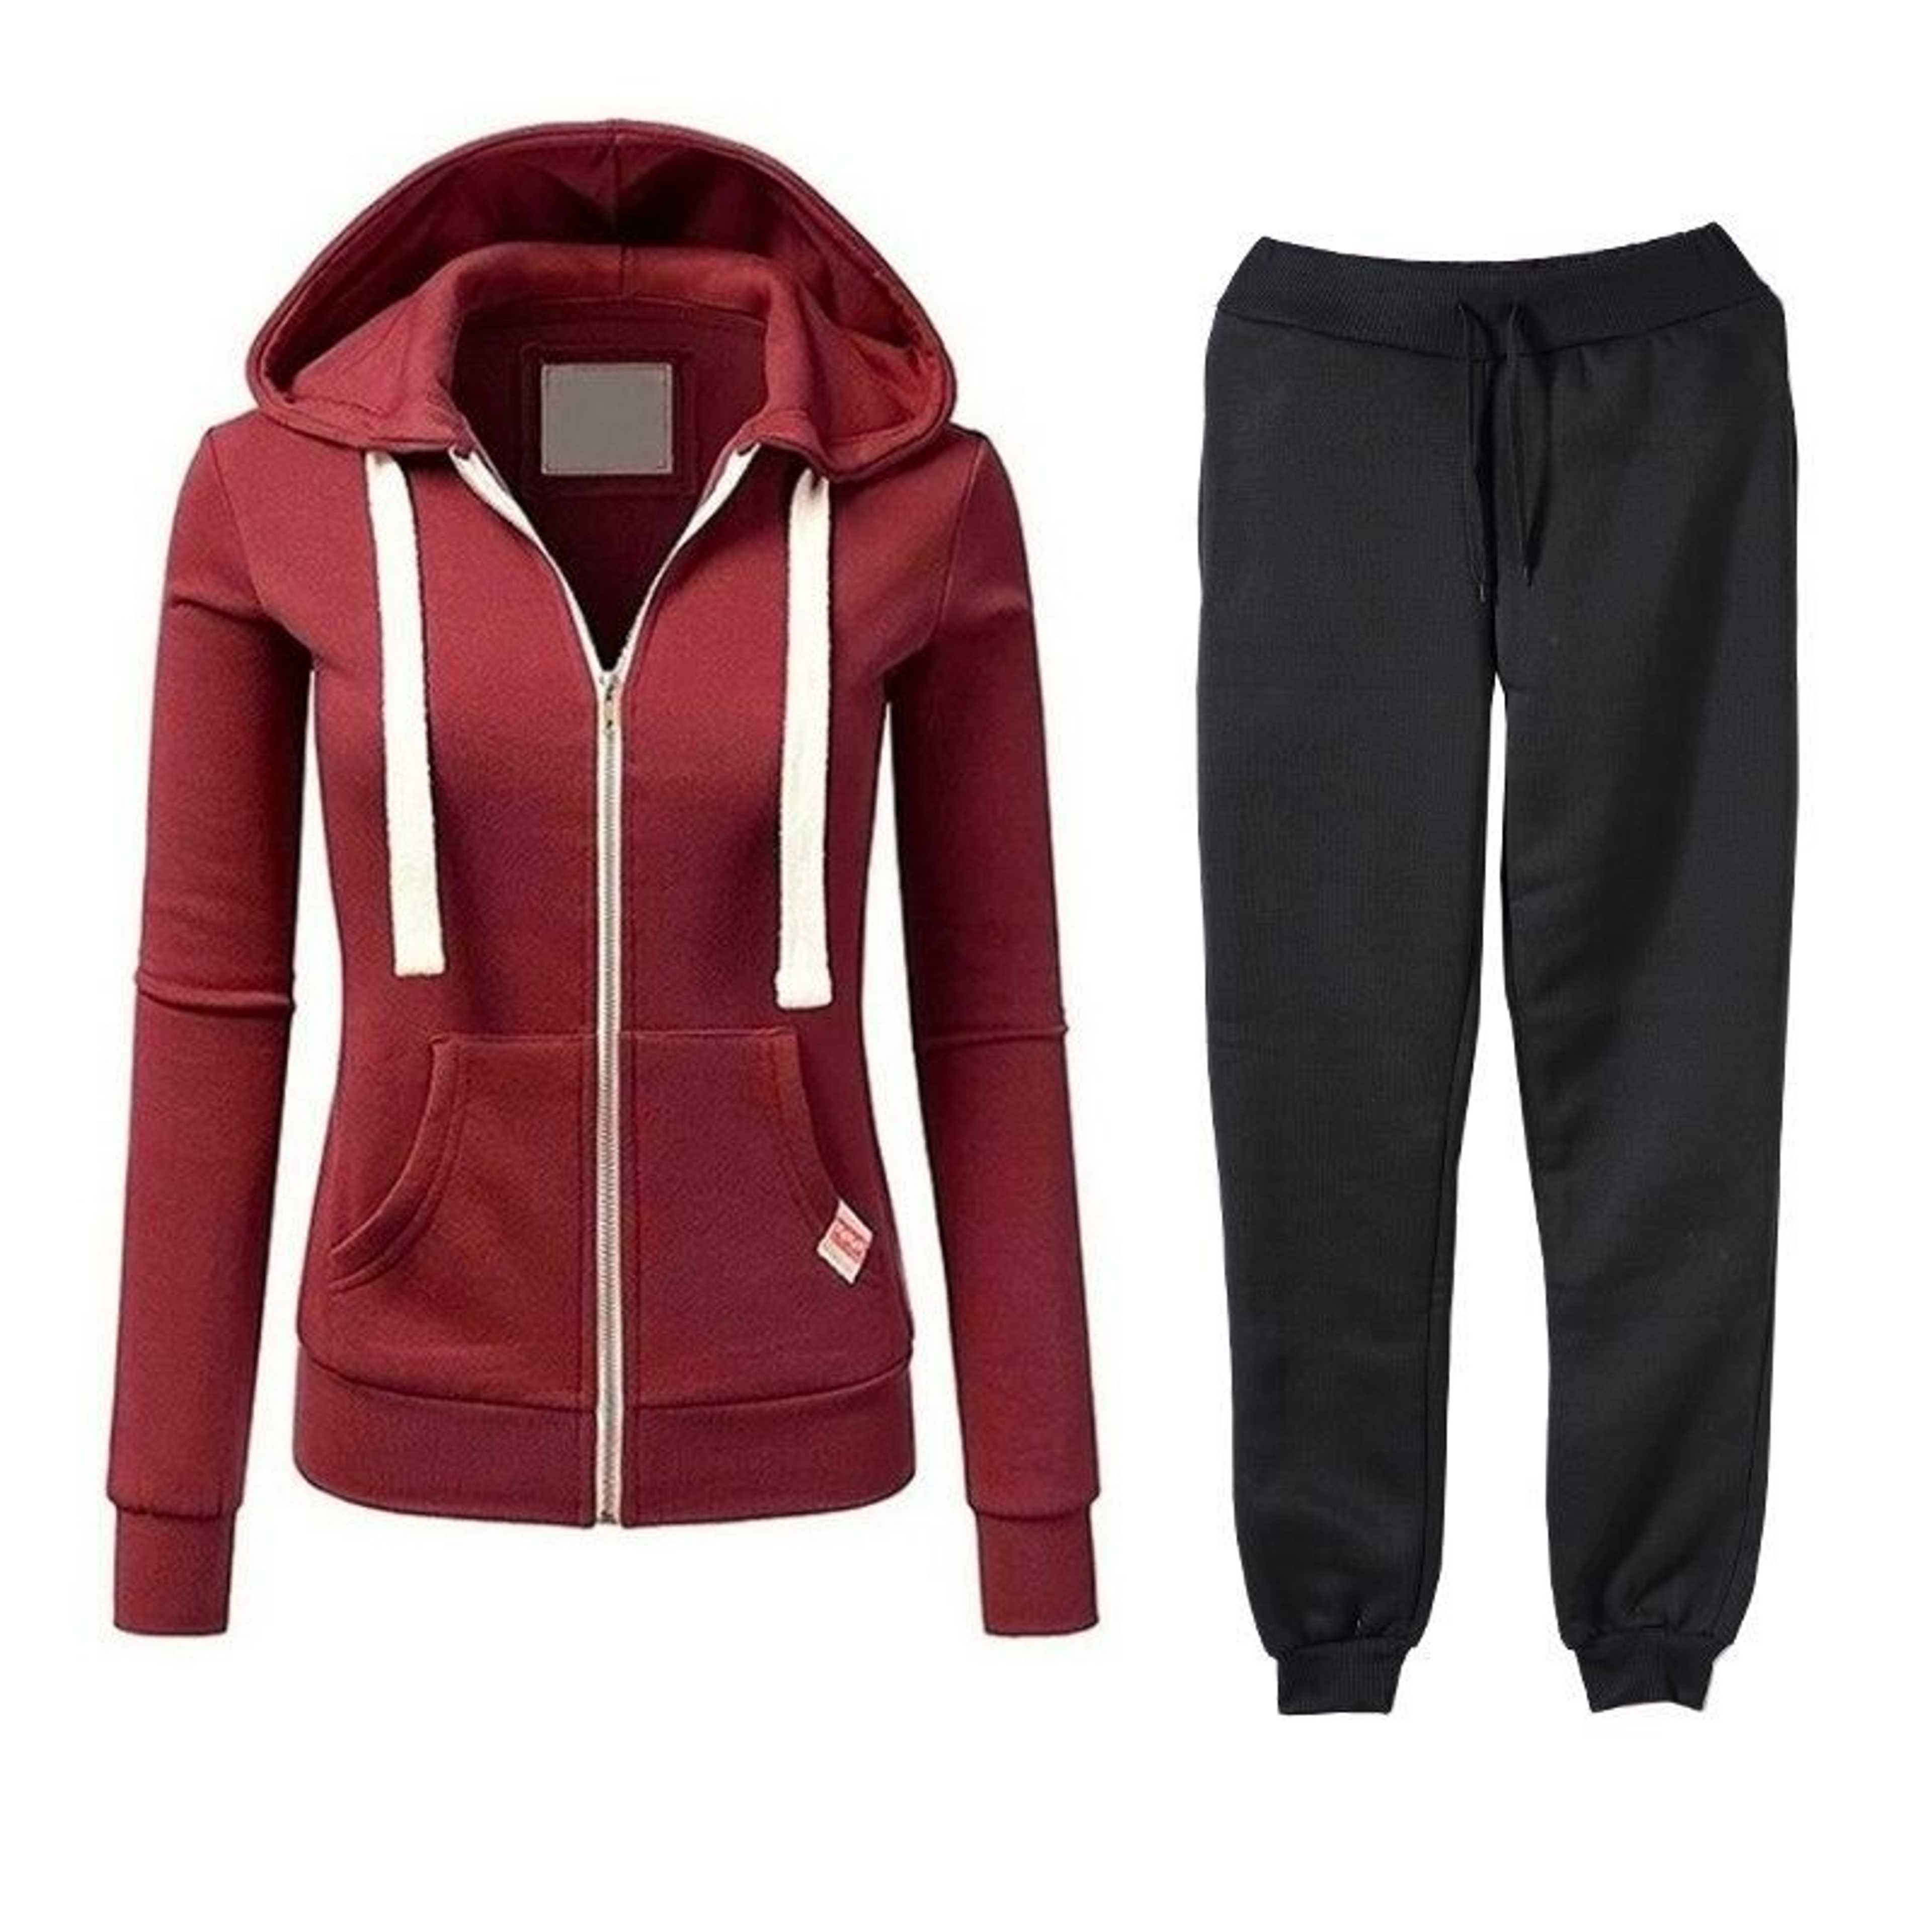 Track Suits For Womens With Zipper hoodie In Marron Color